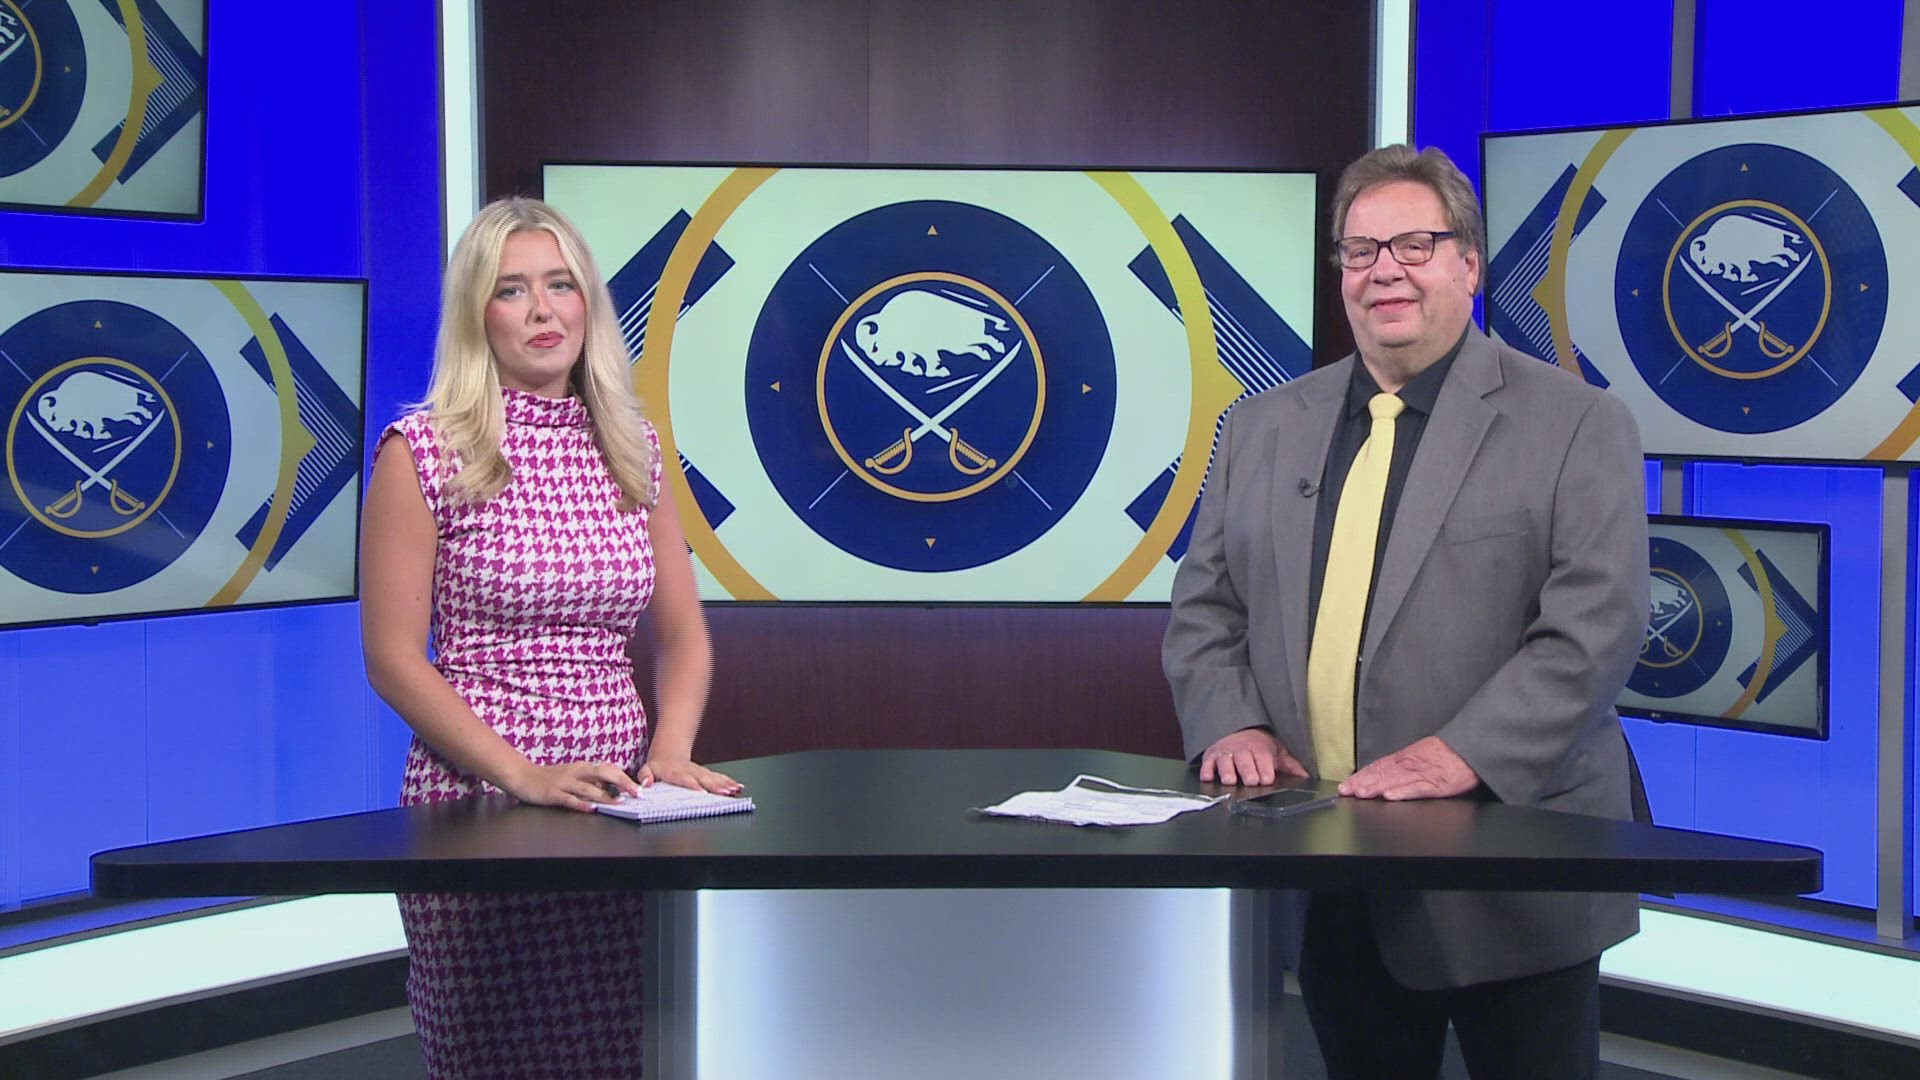 Channel 2's Lindsey Moppert and WGRZ Sabres/NHL insider Paul Hamilton discuss Buffalo's young prospects after the team's recent development camp.